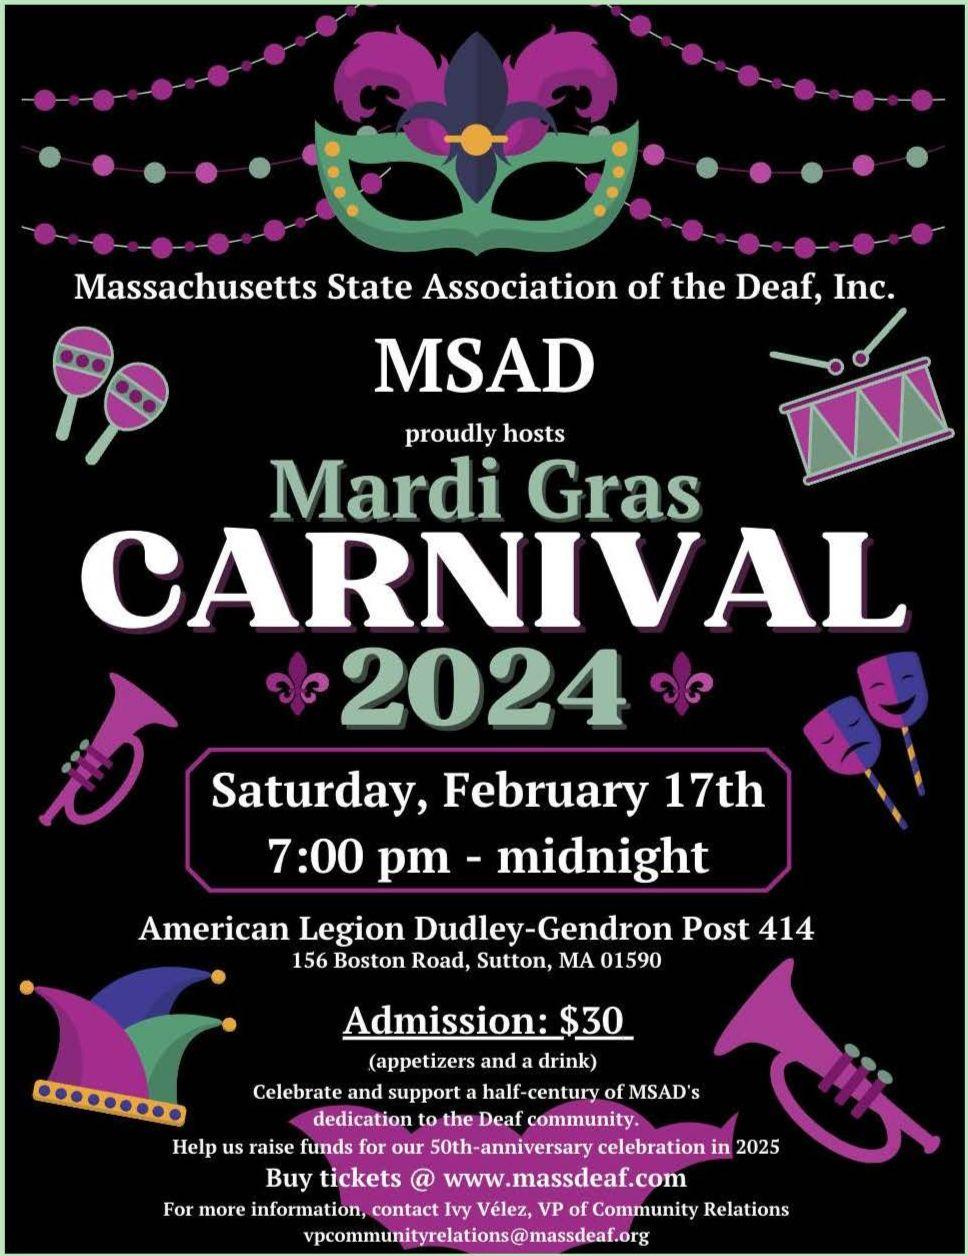 The poster announces a Mardi Gras Carnival event for 2024, organized by the Massachusetts State Association of the Deaf (MSAD). The event is set to take place on Saturday, February 17th, from 7:00 pm to midnight, at the American Legion Dudley-Gendron Post 414 located at 156 Boston Road, Sutton, MA 01590. The admission fee is $30, covering appetizers and a drink.  The poster is themed with Mardi Gras symbols, including a prominent mask, beads, maracas, a drum, and a trumpet, rendered in traditional Mardi Gras colors of purple, green, and gold. The event is part of a fundraising effort for MSAD's 50th-anniversary celebration in 2025.  For ticket purchase or more information, the poster directs to the website www.massdeaf.org. Contact details provided are for Ivy Vélez, the Vice President of Community Relations, whose email is vpcommunityrelations@massdeaf.org.